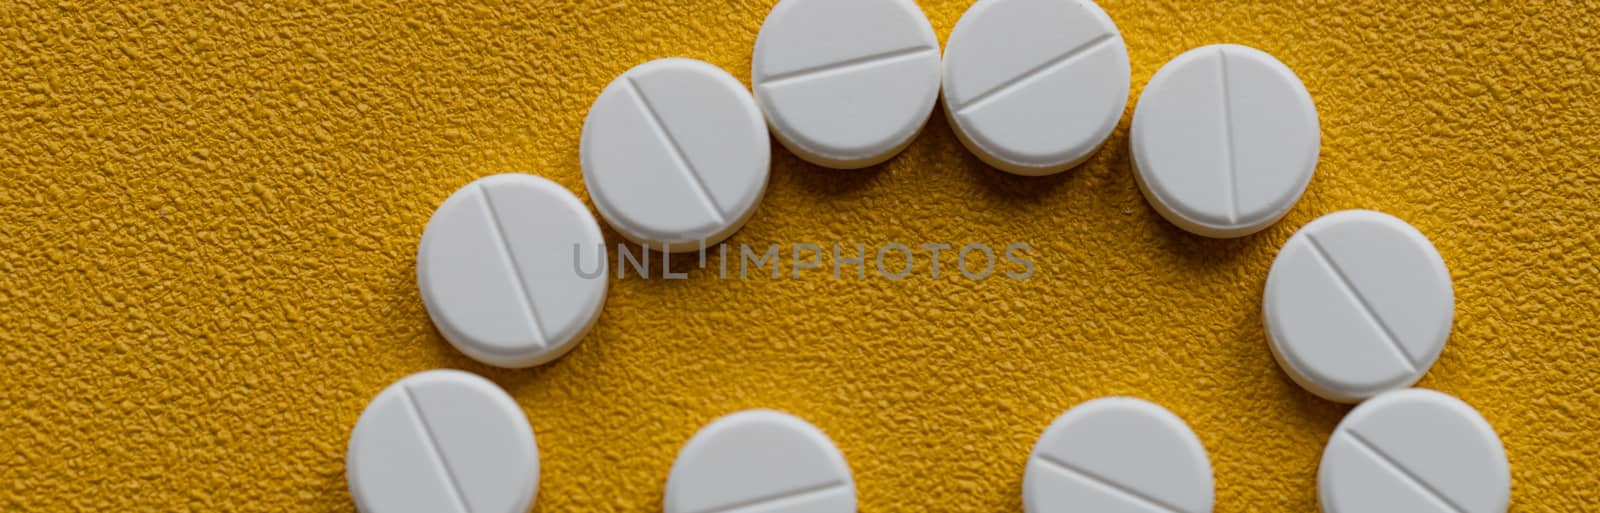 Trendy pattern made with Pharmaceutical medicine pills, tablets and capsules on bright light yellow background. Medicine creative concepts. by bonilook